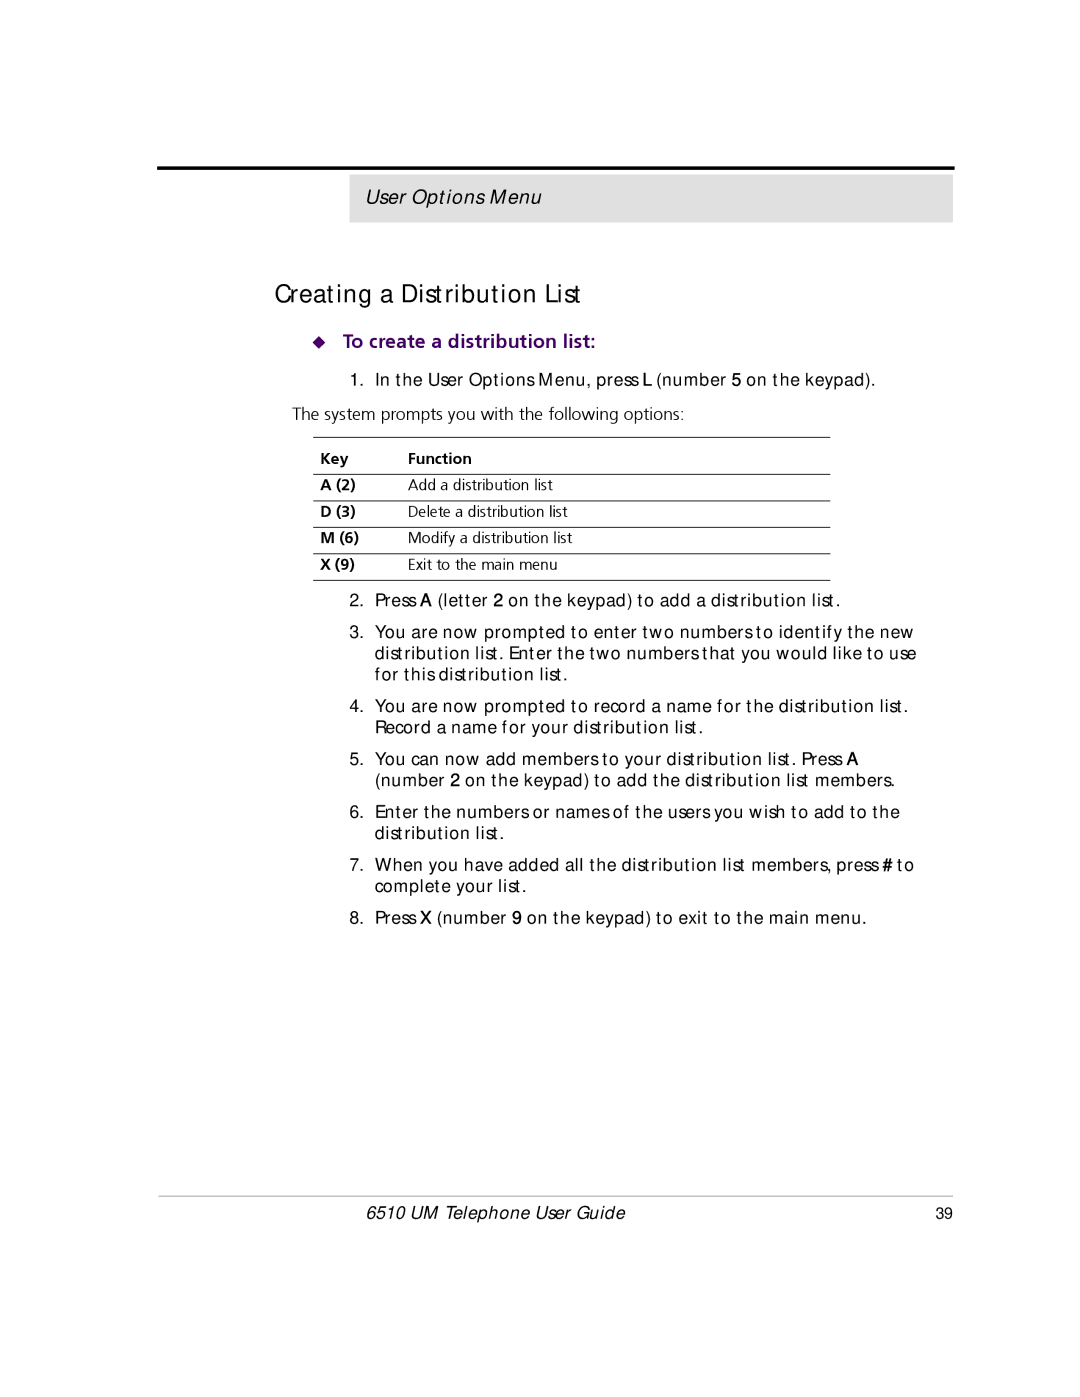 Mitel 6510 manual Creating a Distribution List, To create a distribution list 